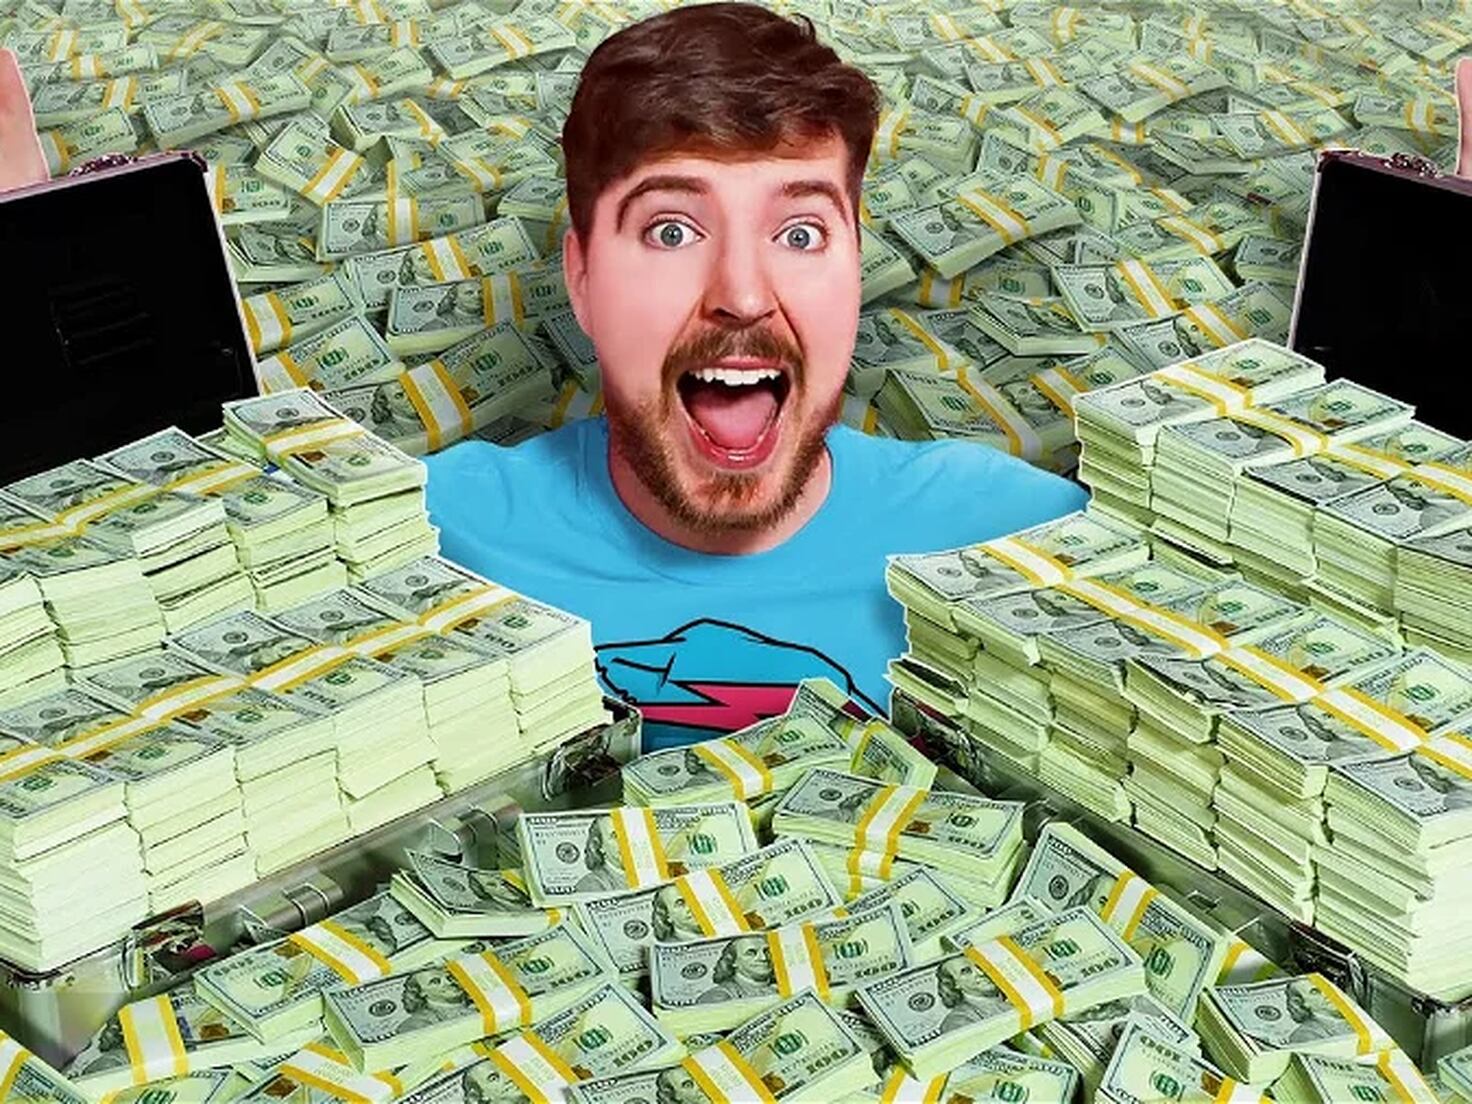 MrBeast says despite the backlash he gets he's going to continue